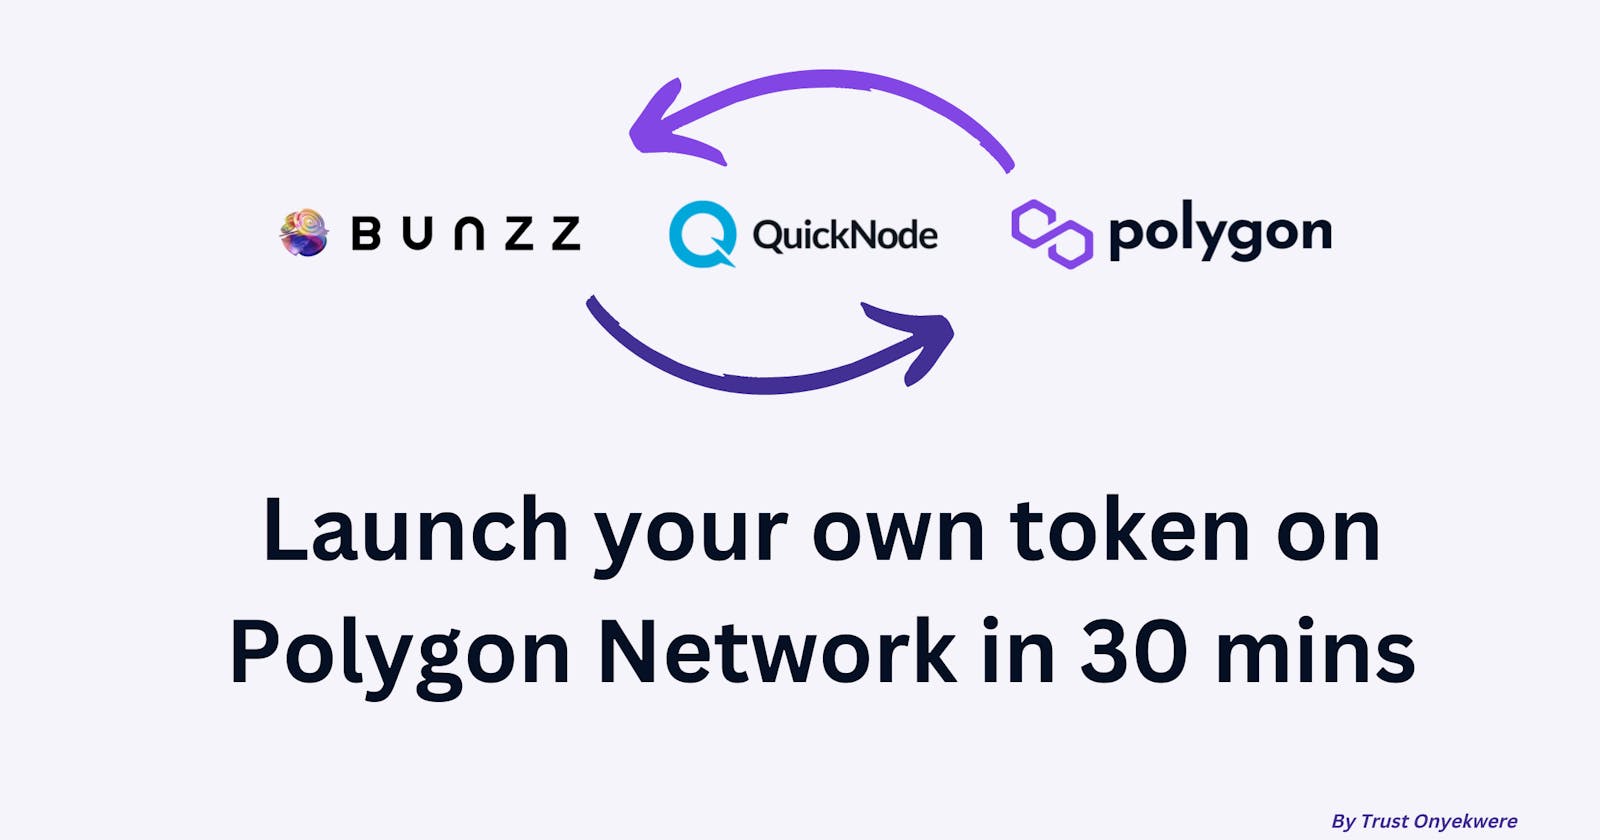 Launch your own token on Polygon Network in 30 mins.